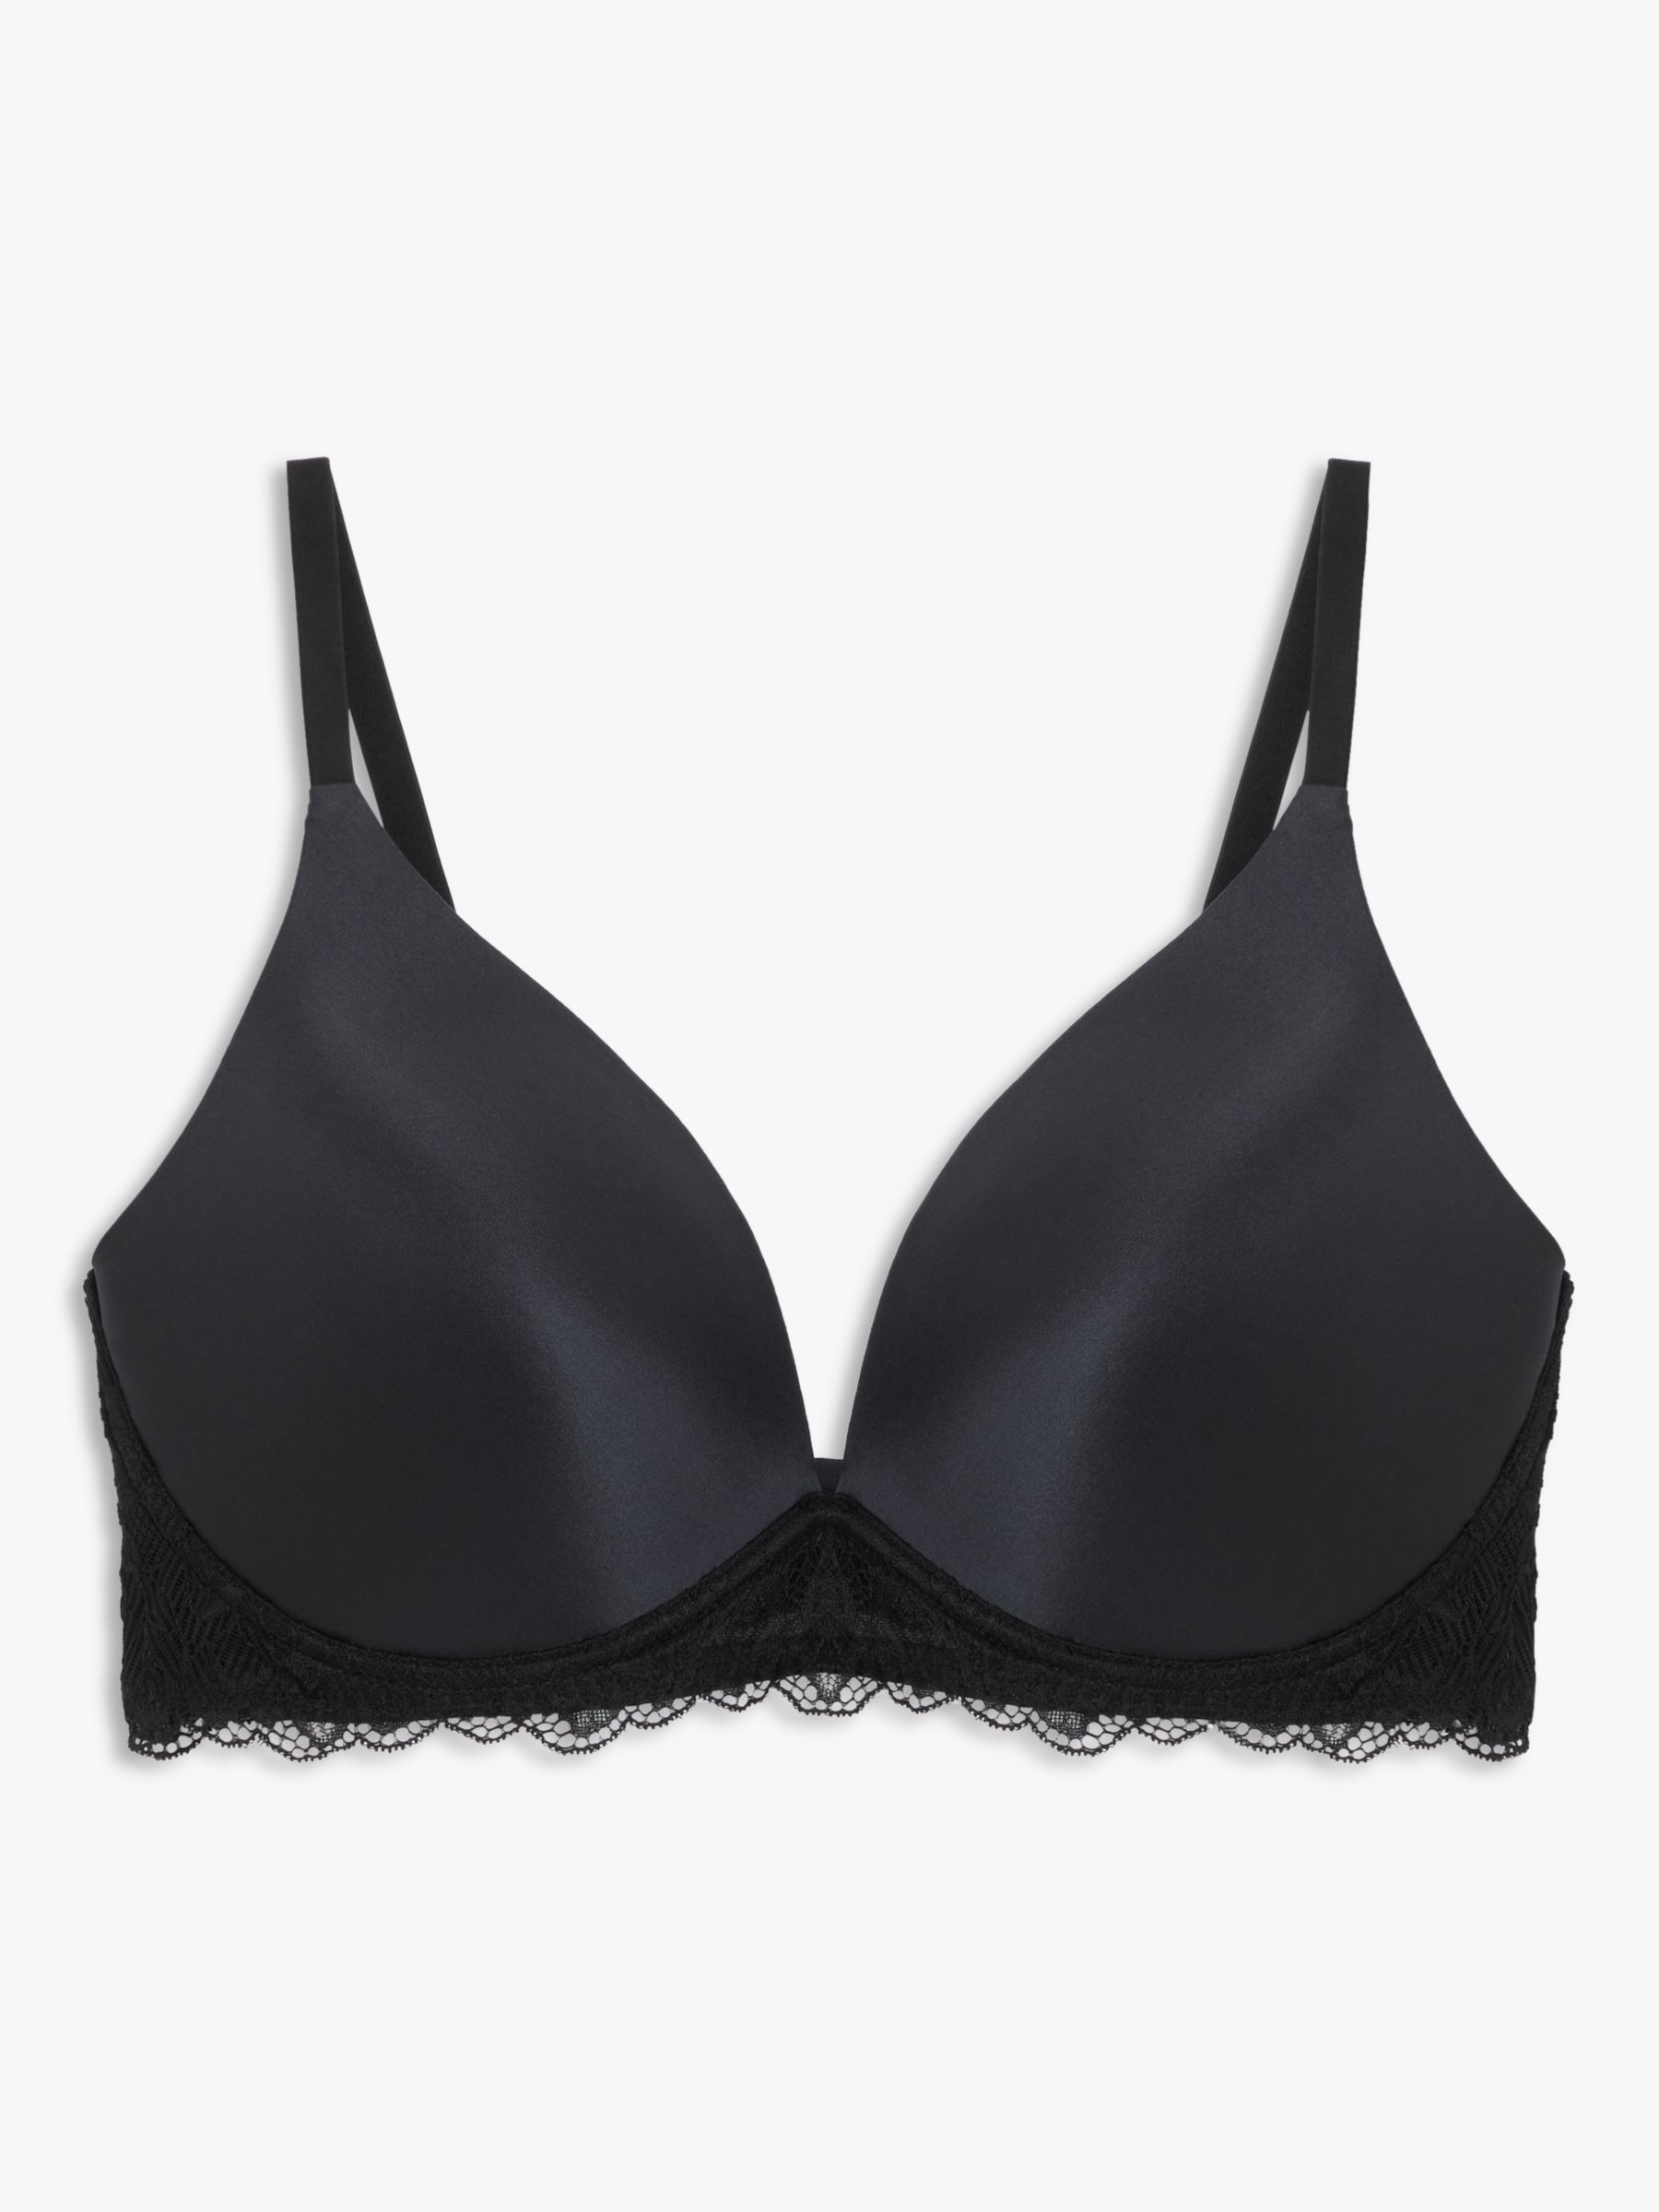 John Lewis ANYDAY Willow Non-Wired Bra, Black, 32A